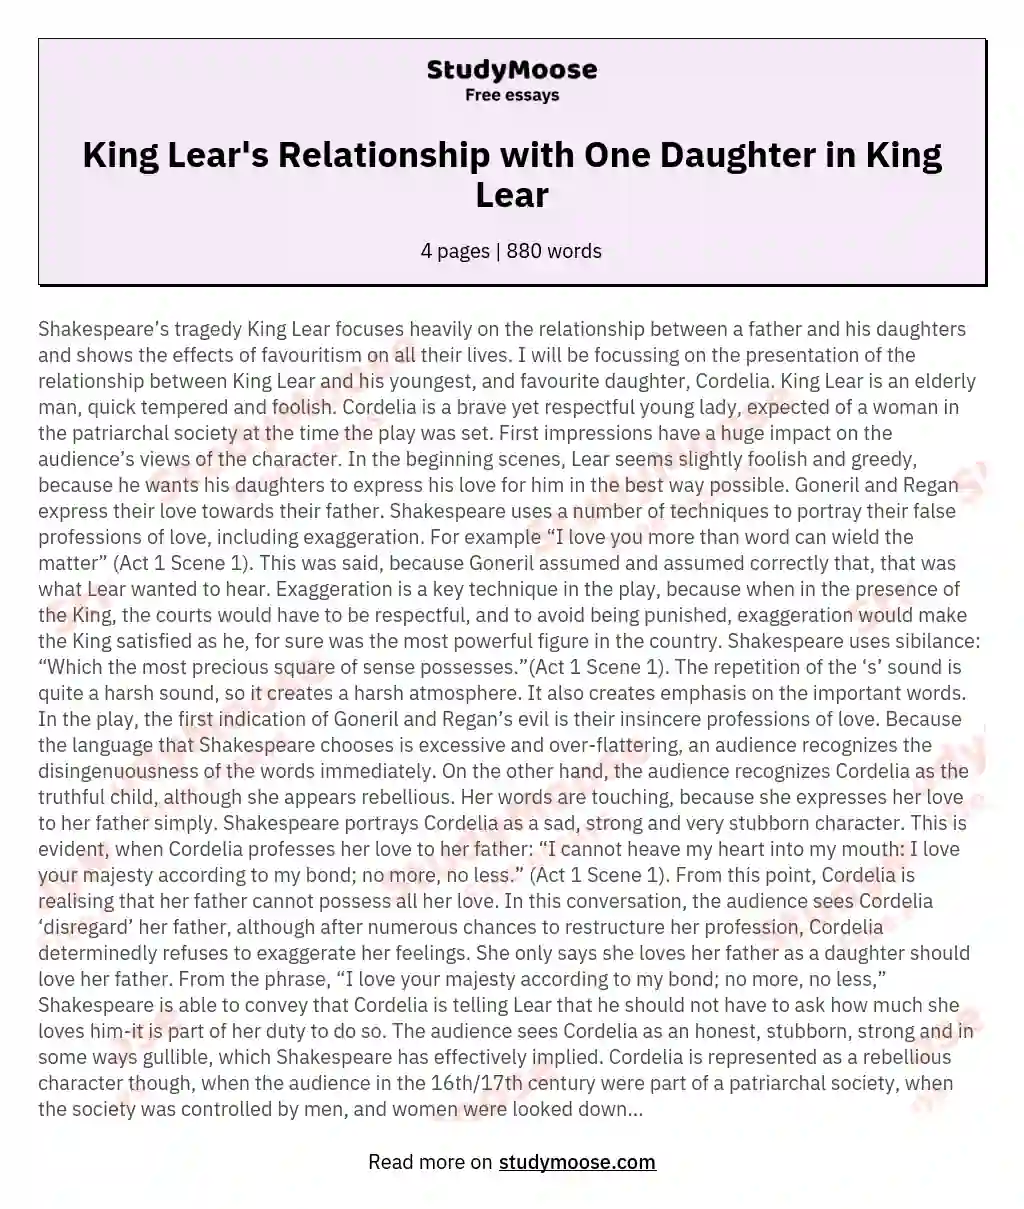 King Lear's Relationship with One Daughter in King Lear